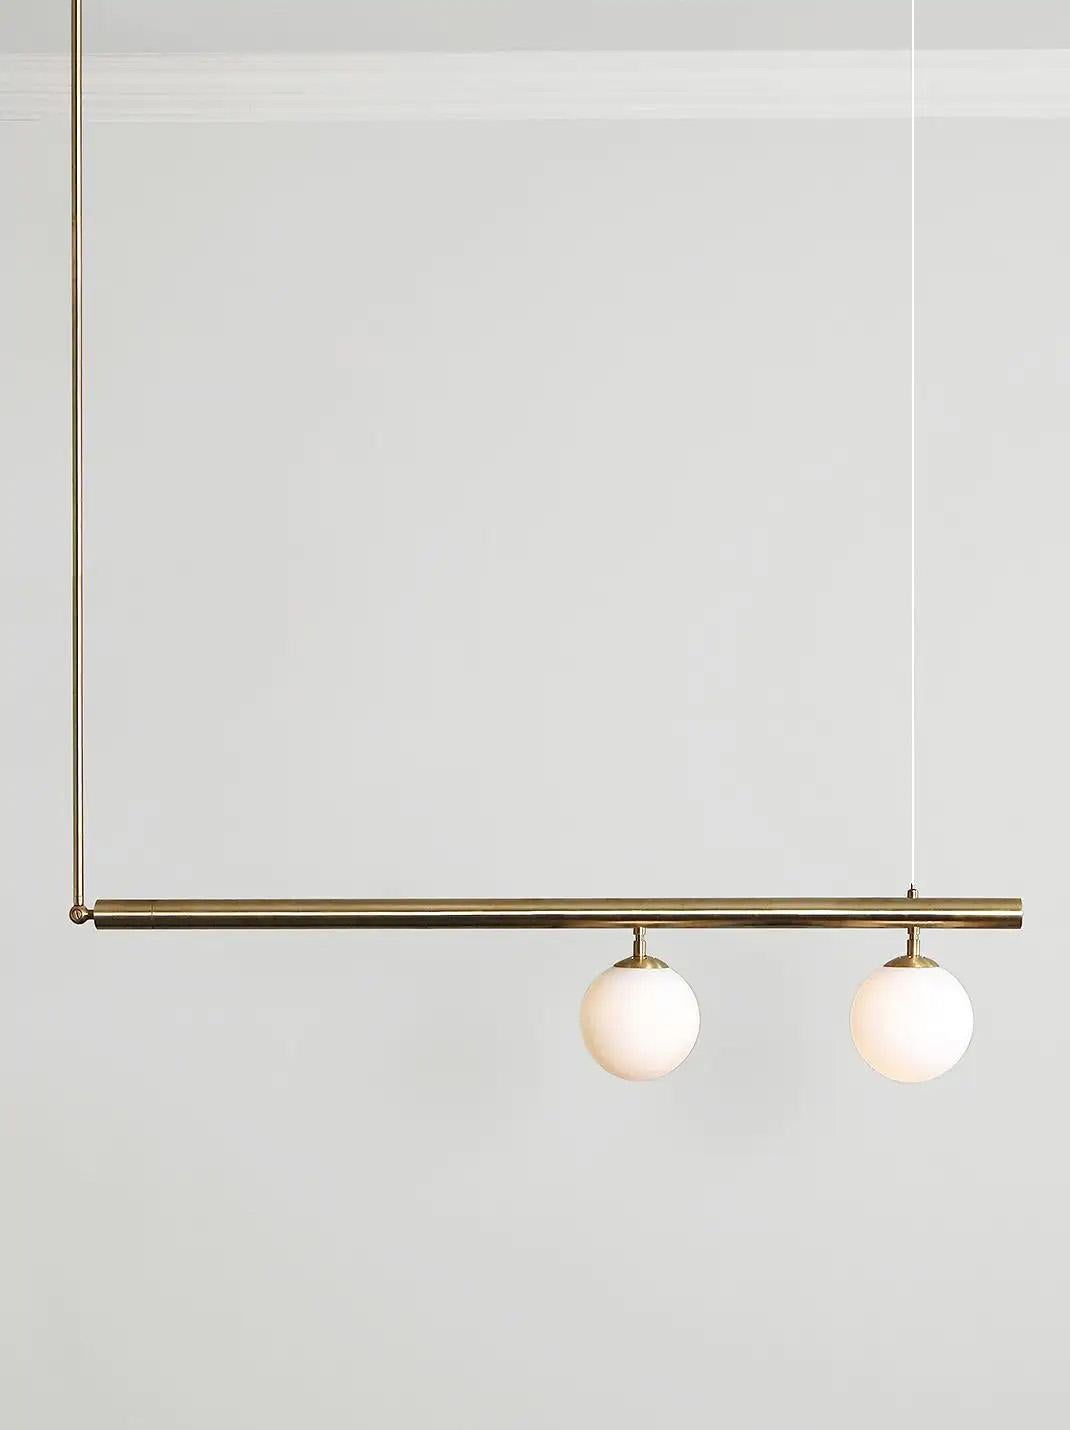 Contemporary Sculpted Brass Pendant, Satellite 2 by Paul Matter

Satellite is inspired by the conceptual and minimalist movement of the 1960s and 1970s. These light sculptures are fundamentally geometric and architectonic.
They rely on the cube as